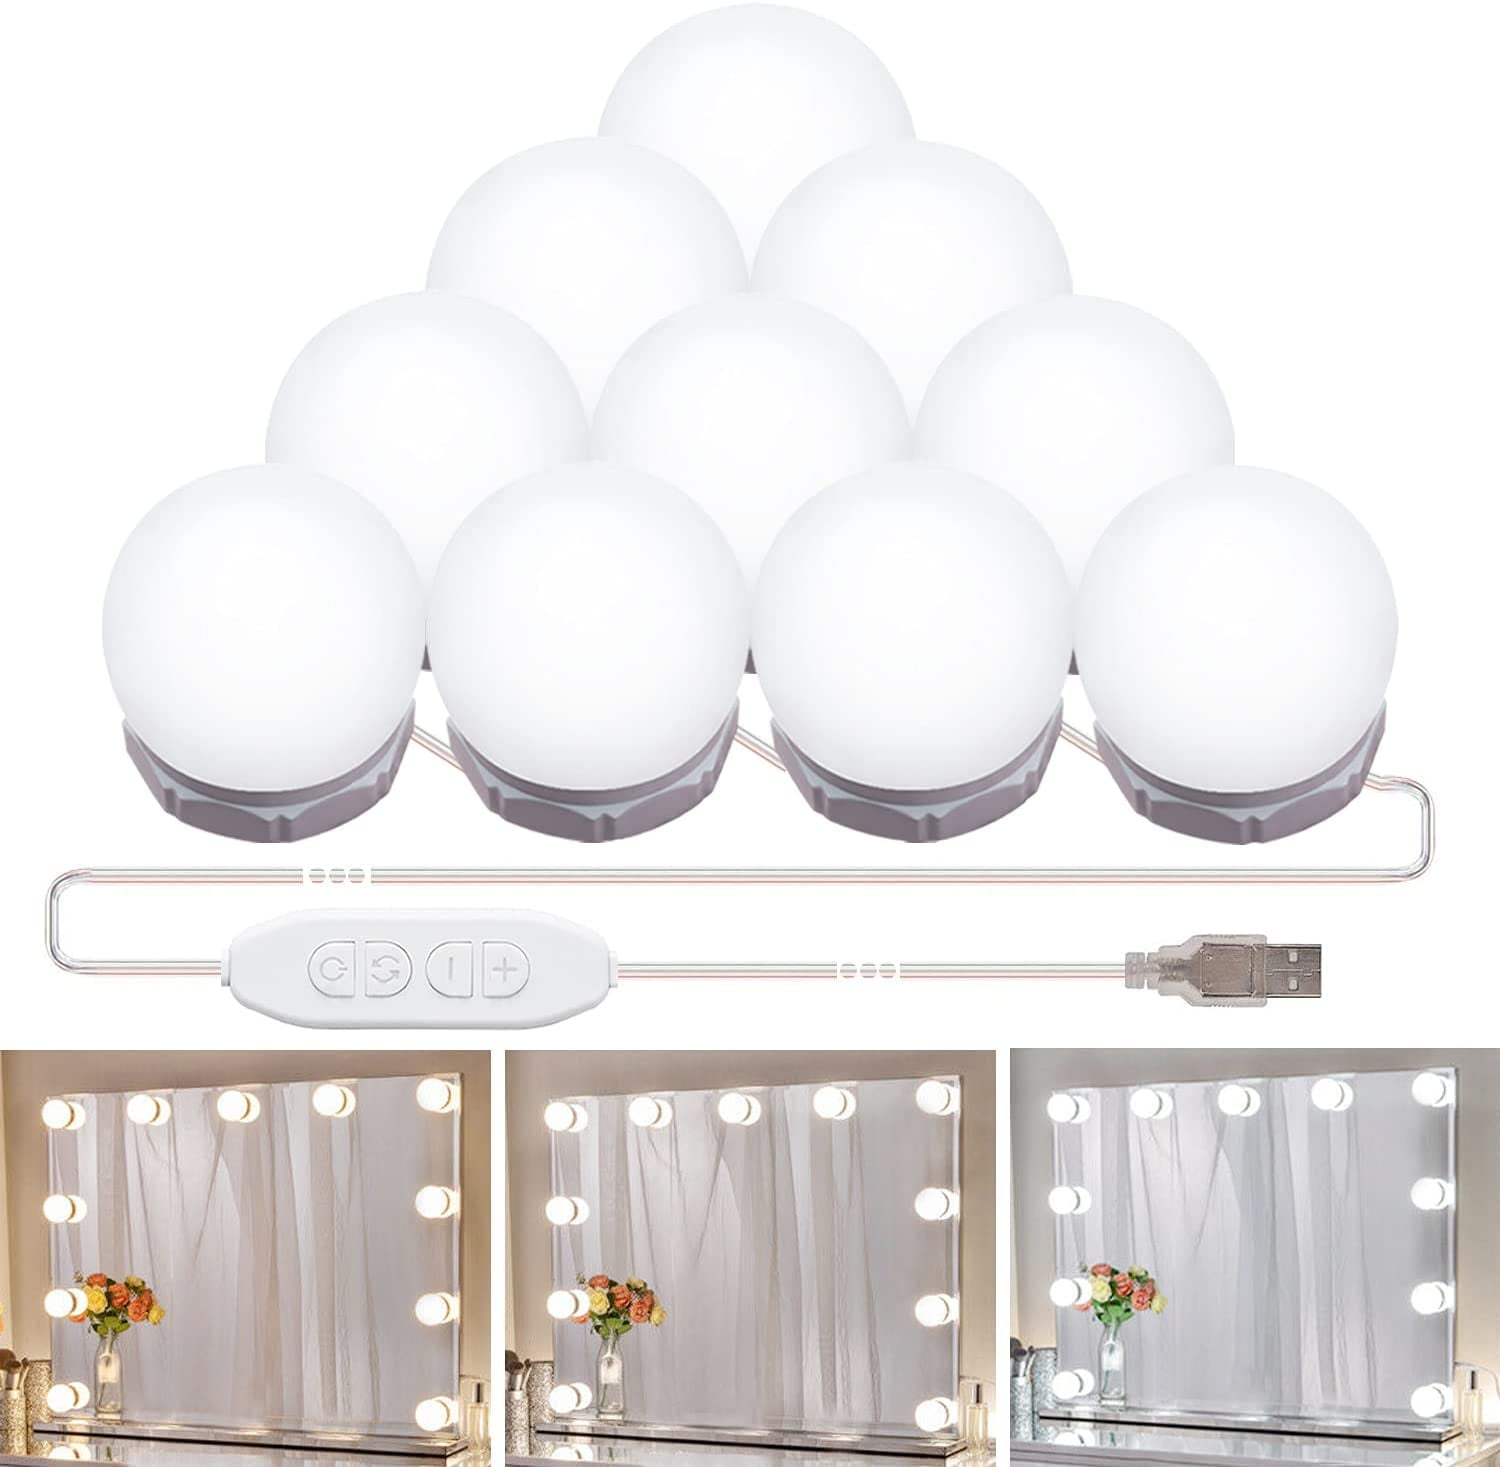 No Mirror & USB Charger LED Vanity Mirror Lights Kit USB Cable Hollywood Style for DIY Makeup Mirrors Dressing Table Bathroom Light with 10 Led Dimmable Bulbs 3 Color Modes & 10 Brightness 